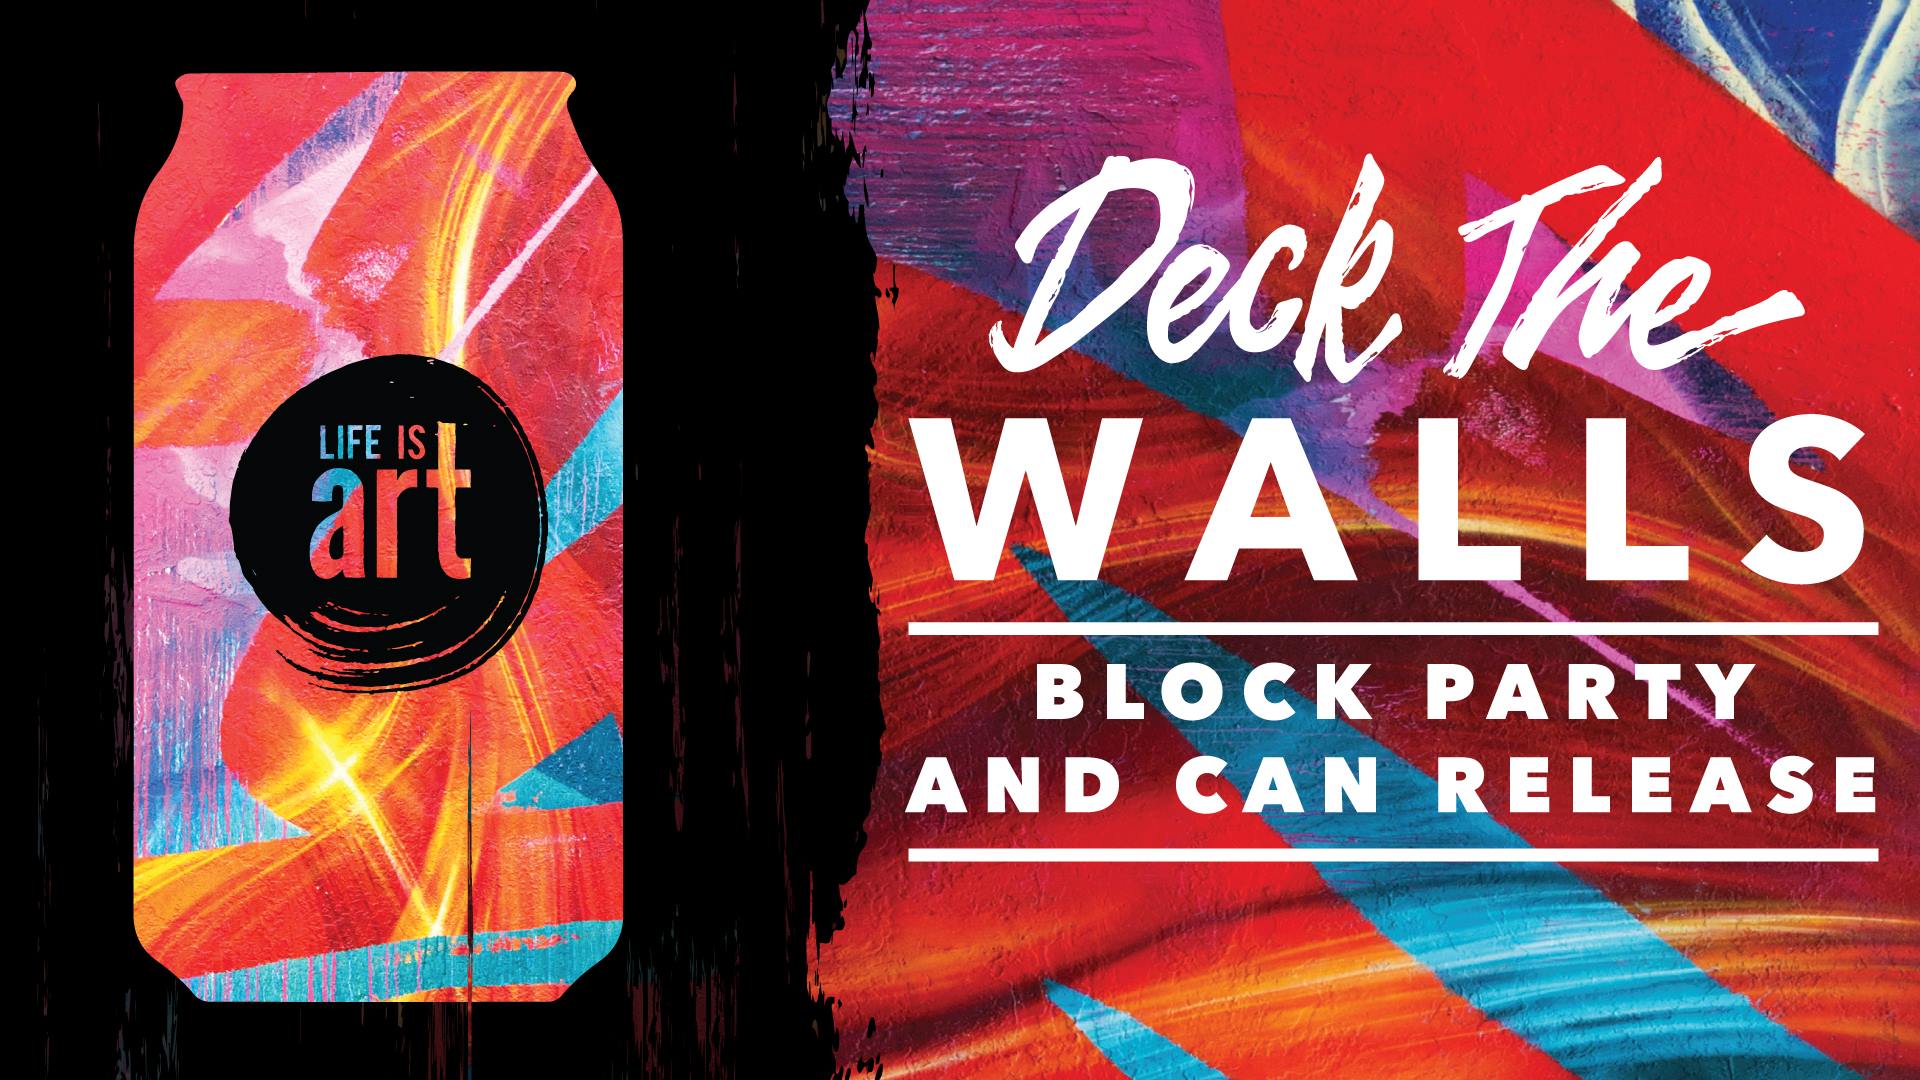 EVENT #120 Concrete Beach Brewery Deck the Walls Block Party to Benefit Life Is Art November 18, 2017